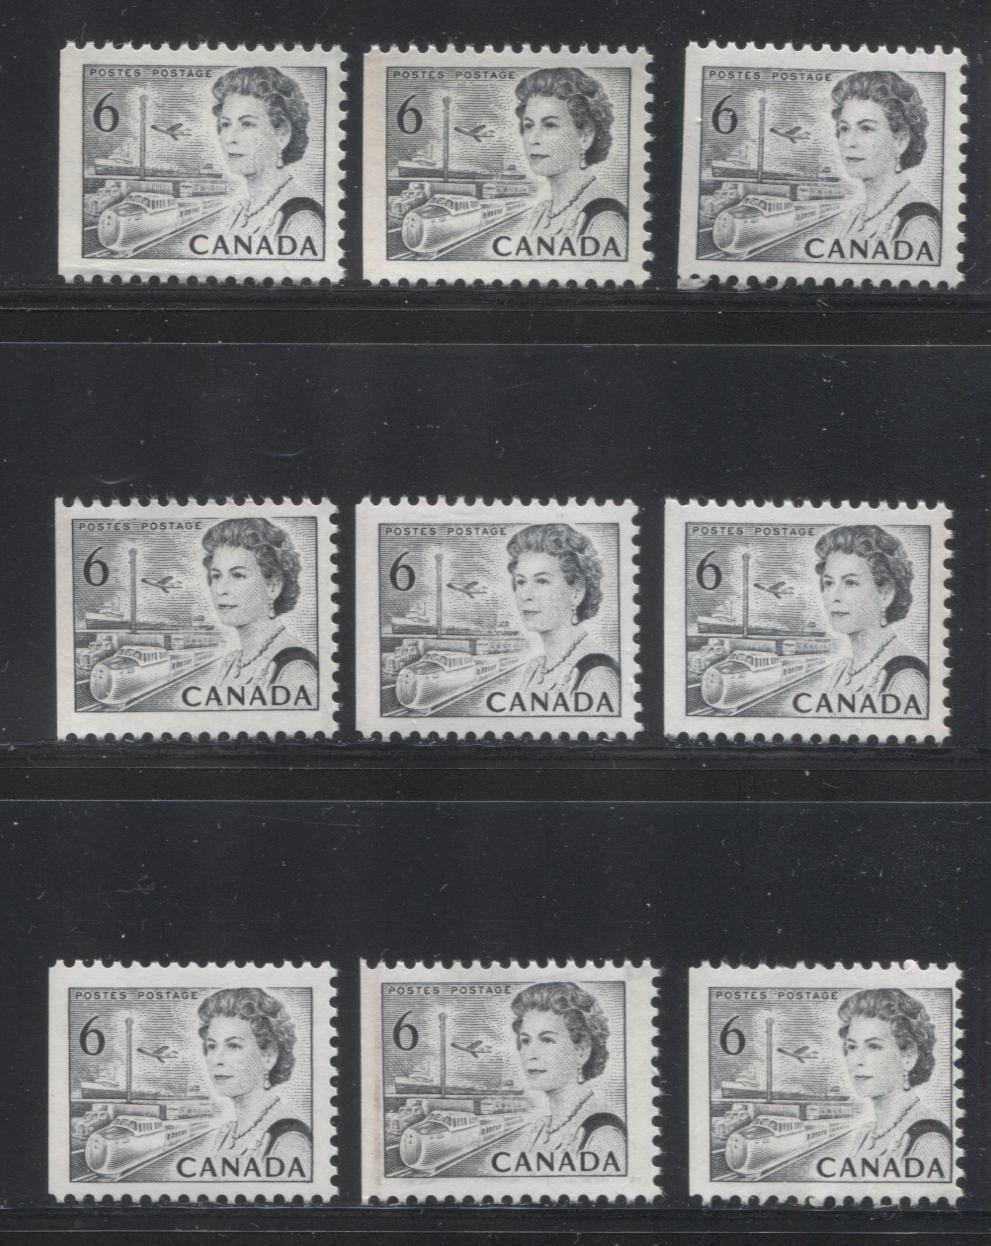 Lot 124 Canada #460cpx-cpxviii 6c Black Queen Elizabeth II, 1967-1973 Centennial Issue, Nine FNH/VFNH Tagged Booklet Singles On Various Fluorescent Papers With PVA Gum, Die 2, Perf 12.5 x 12